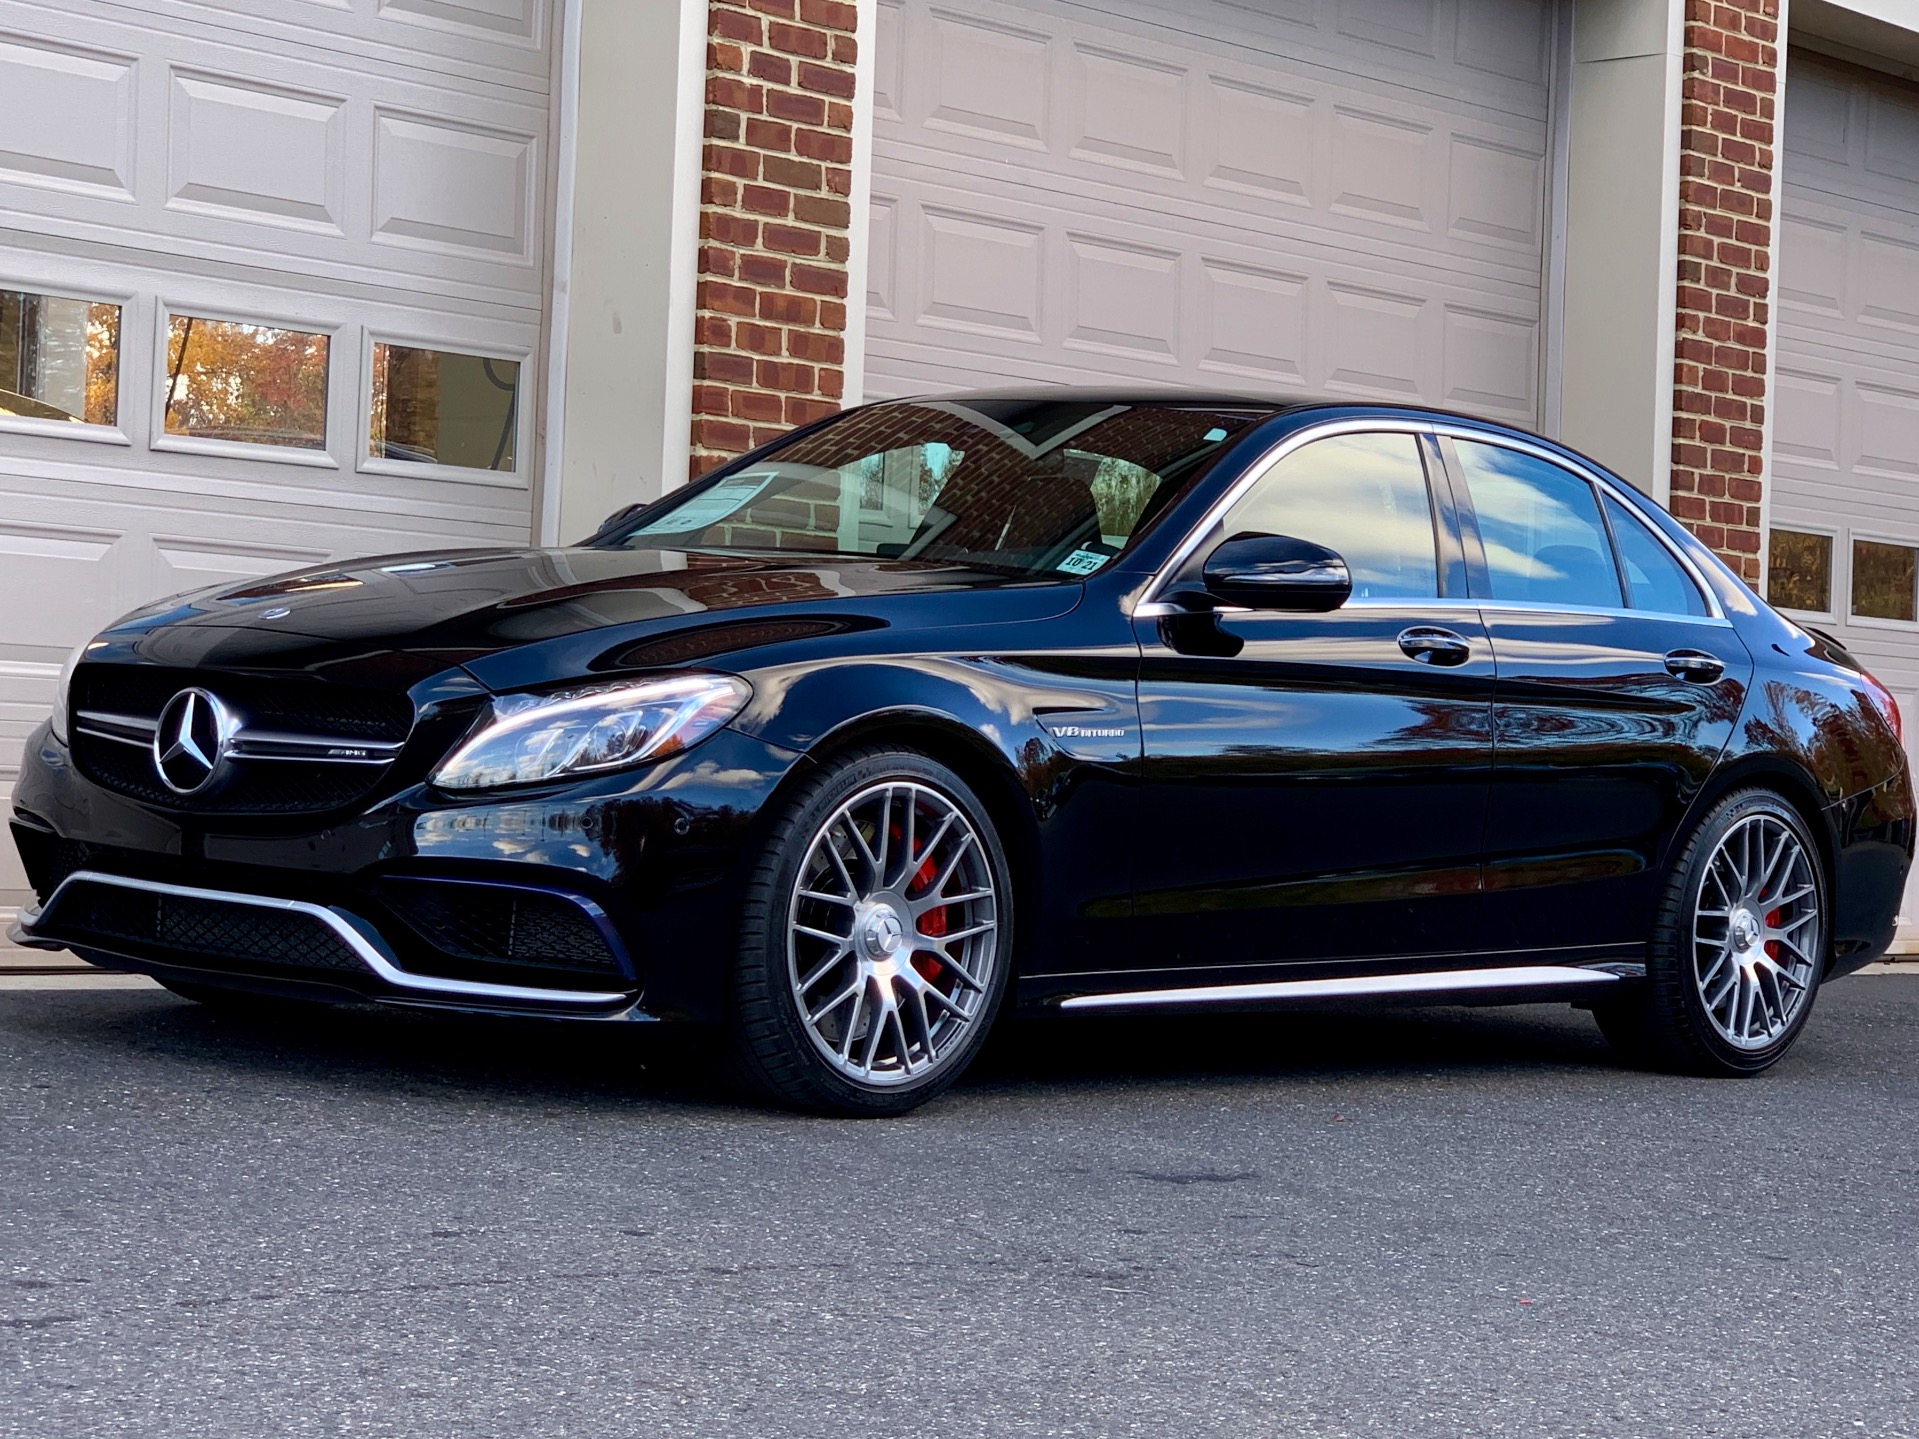 2016 Mercedes-Benz C-Class AMG C 63 S Stock # 119415 for sale near ...